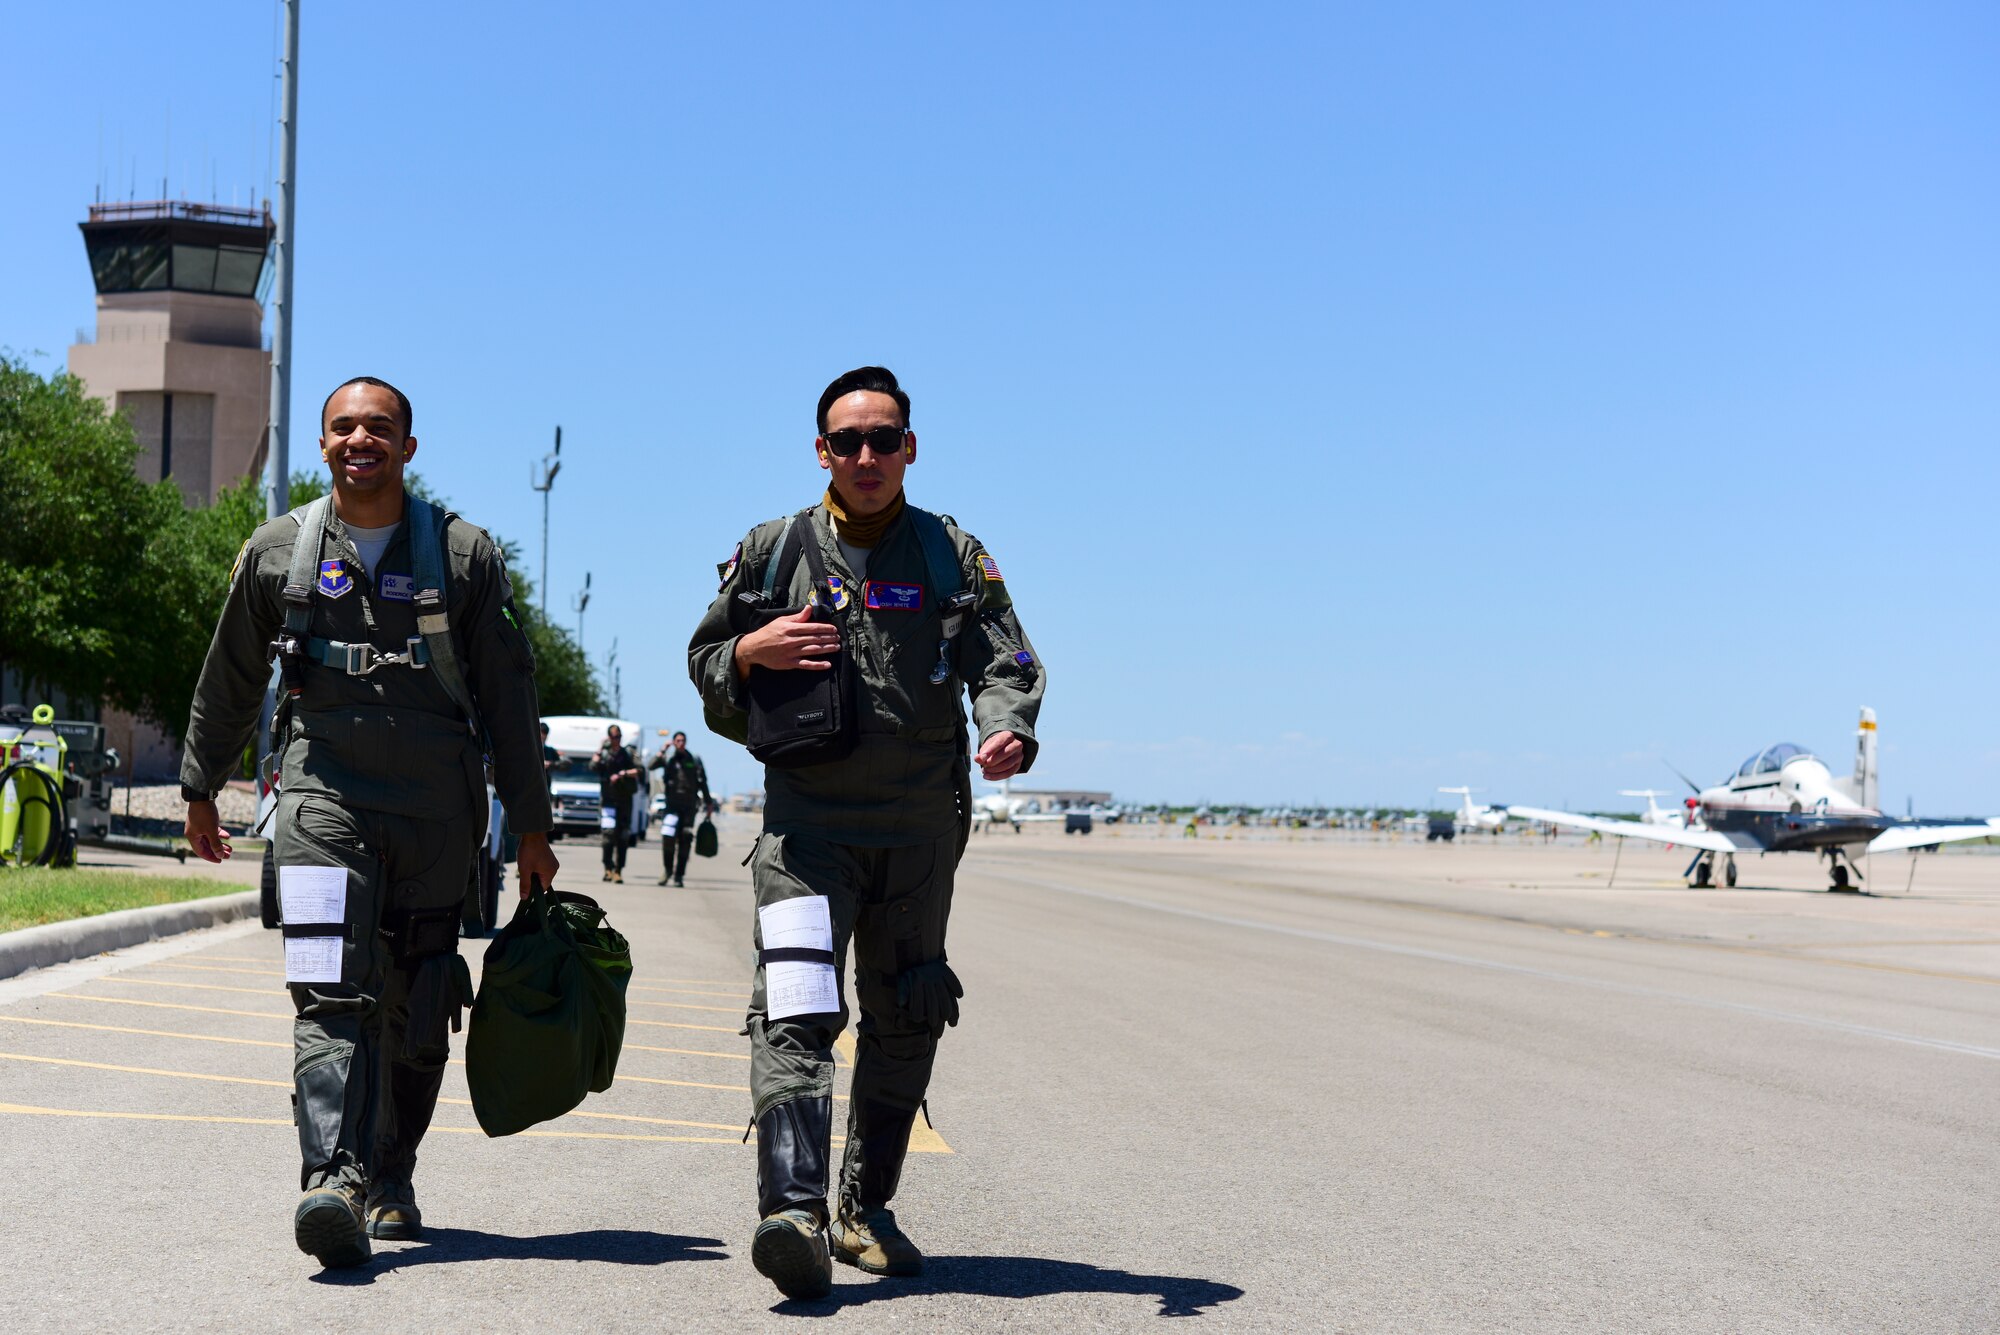 2nd Lt. Roderick Byars, 47 Student Squadron student pilot, and Capt. Joshua White, 434th Flying Training Squadron X flight commander and instructor pilot, walk out on the flightline, April 23, 2020 at Laughlin Air Force Base, Texas, to a T-6A Texan II, the aircraft the 434th FTS trains with. The specialized undergraduate pilot training students still complete the same number of tests, simulations and flights despite COVID-19. (U.S. Air Force photo by Senior Airman Anne McCready)